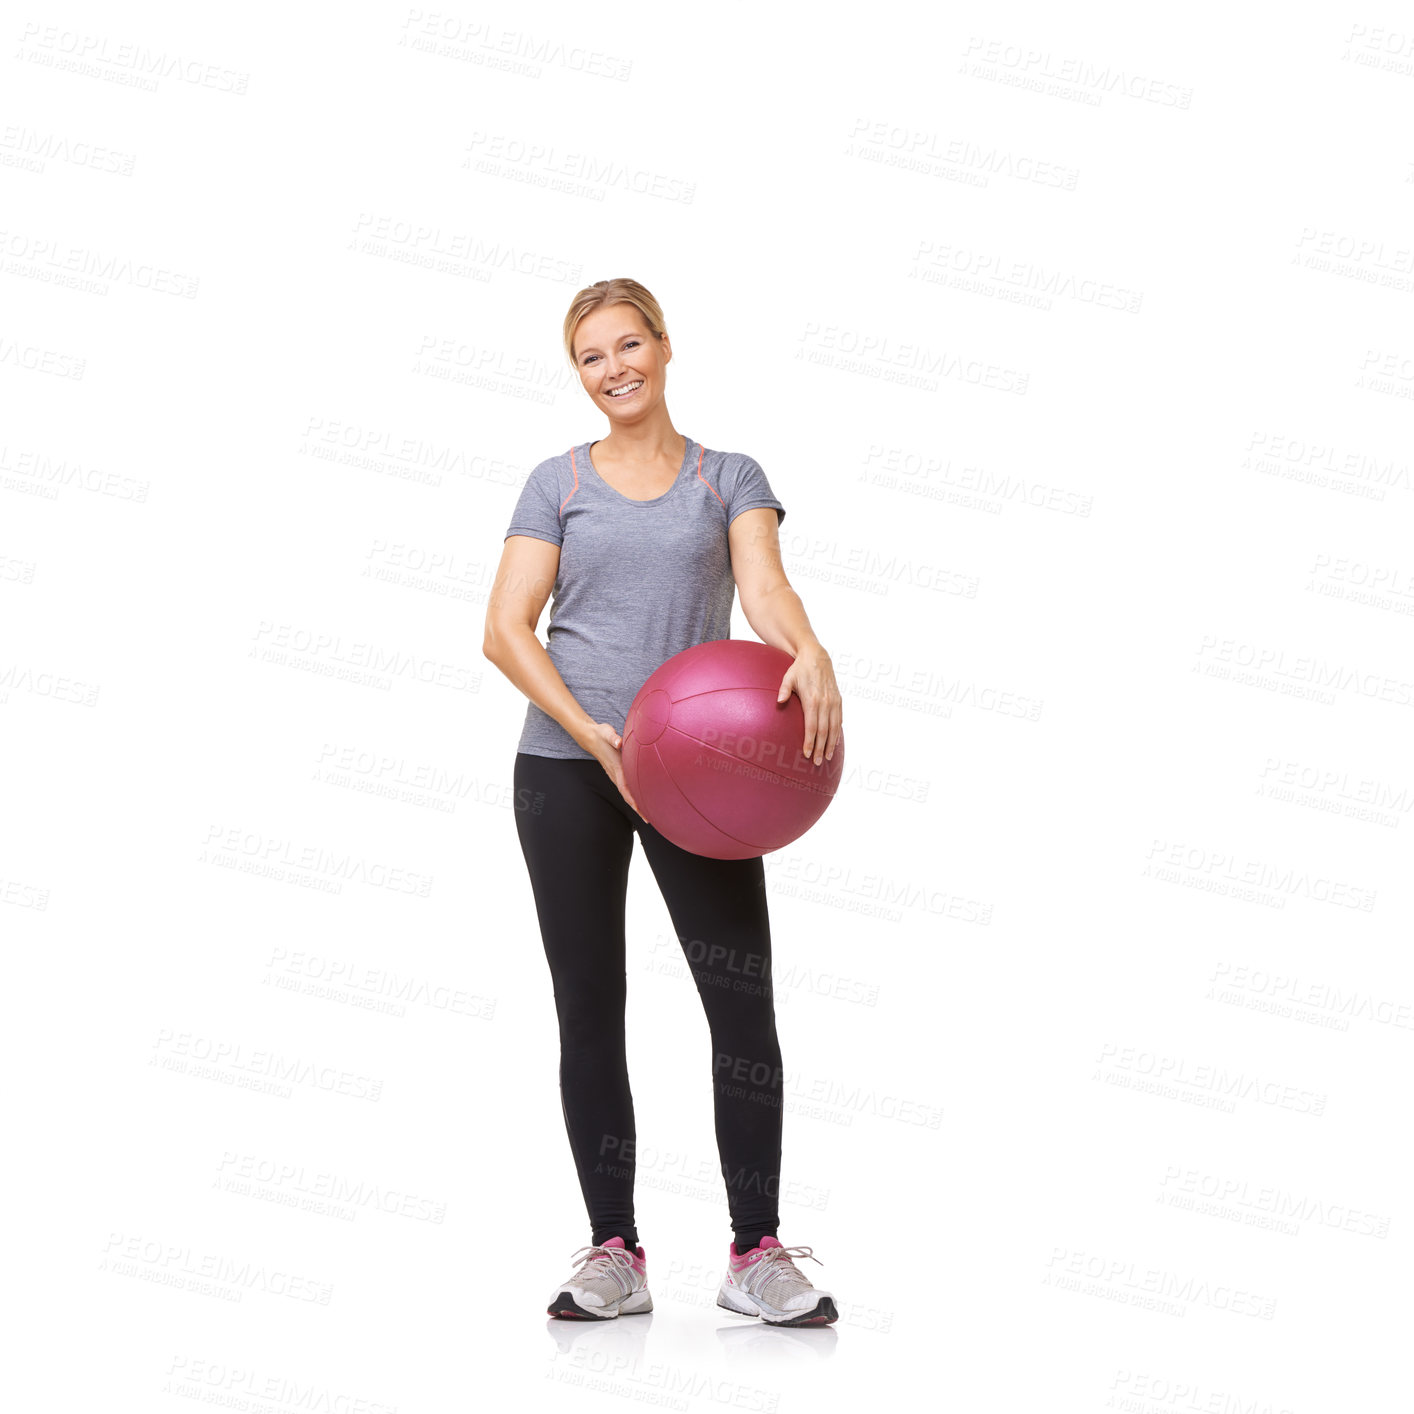 Buy stock photo A beautiful young woman in gymwear holding a medicine ball